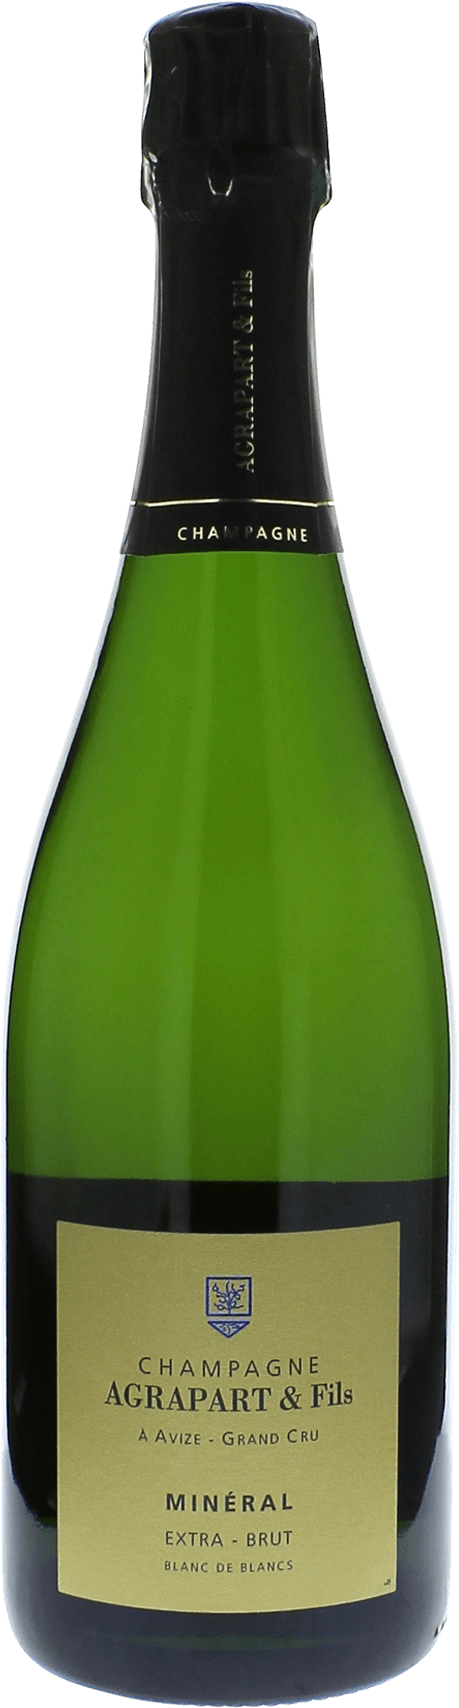 Agrapart  mineral extra brut blanc de blancs 2008  Champagne, Agrapart